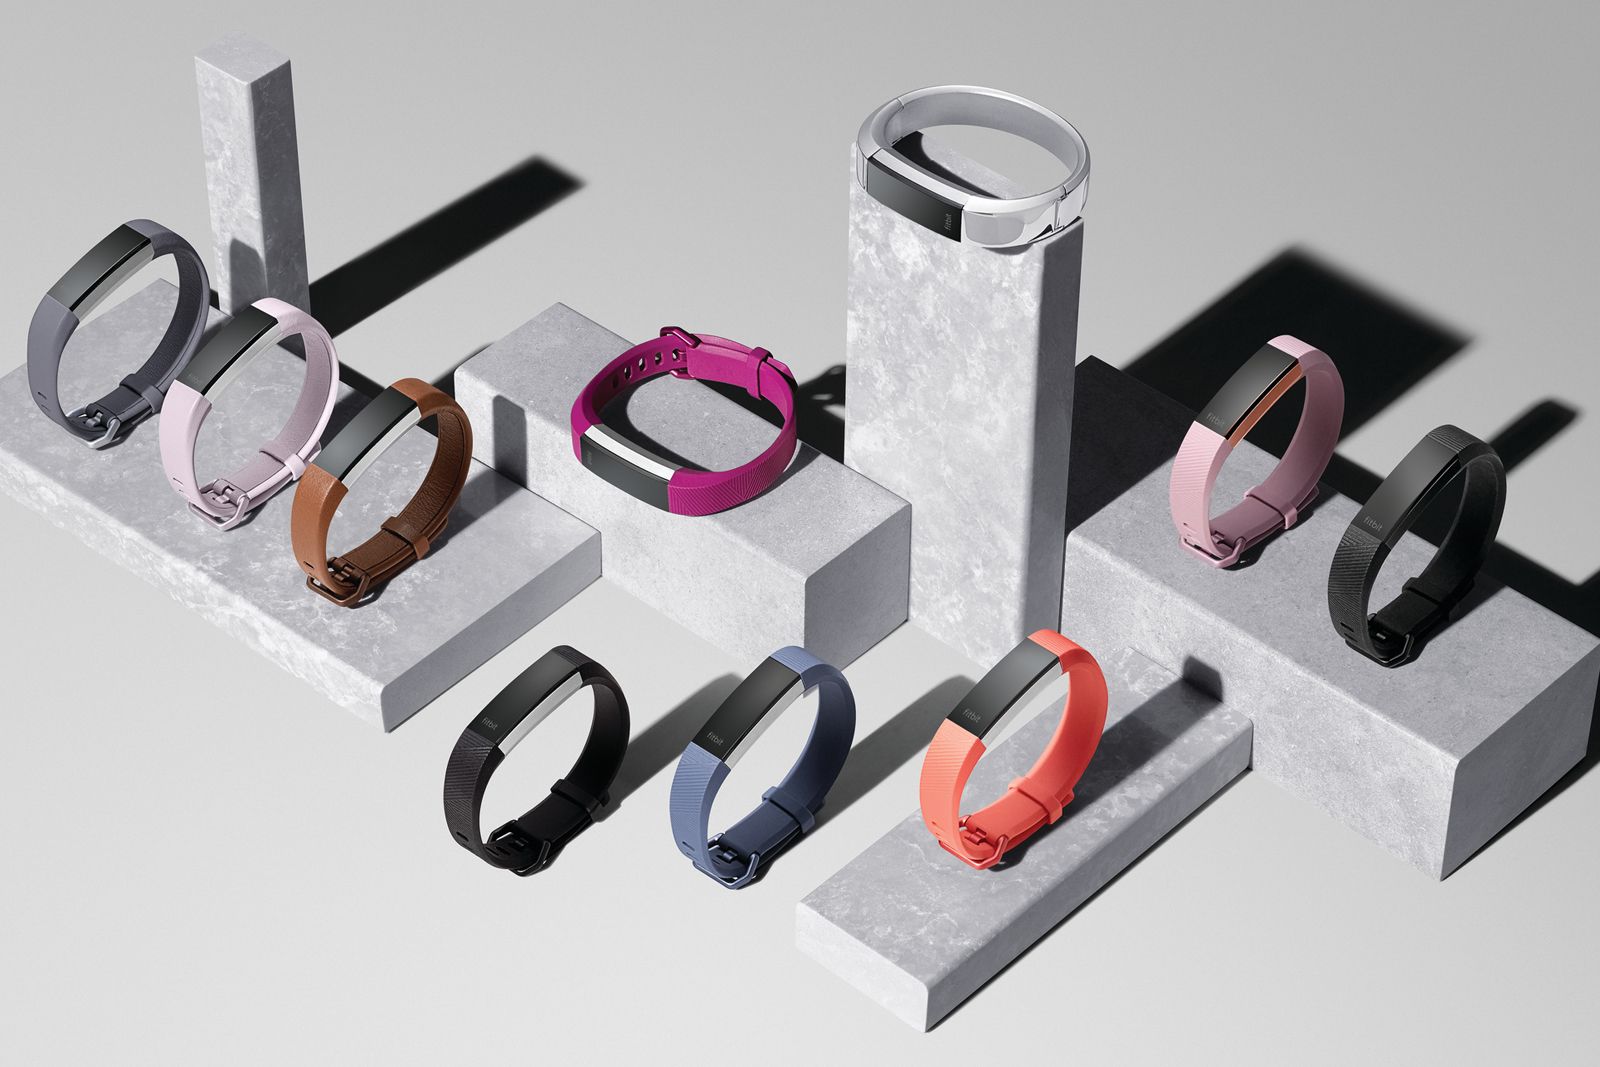 fitbit announces alta hr for heart rate tracking in slim stylish package image 1